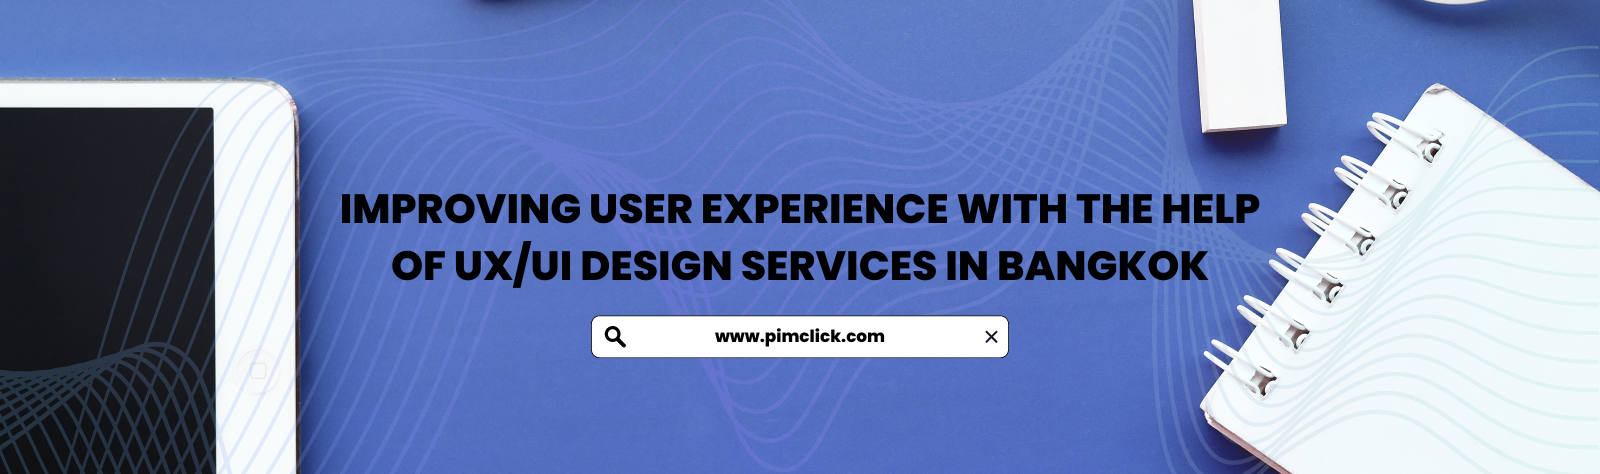 improving-user-experience-with-the-help-of-uxui-design-services-in-bangkok